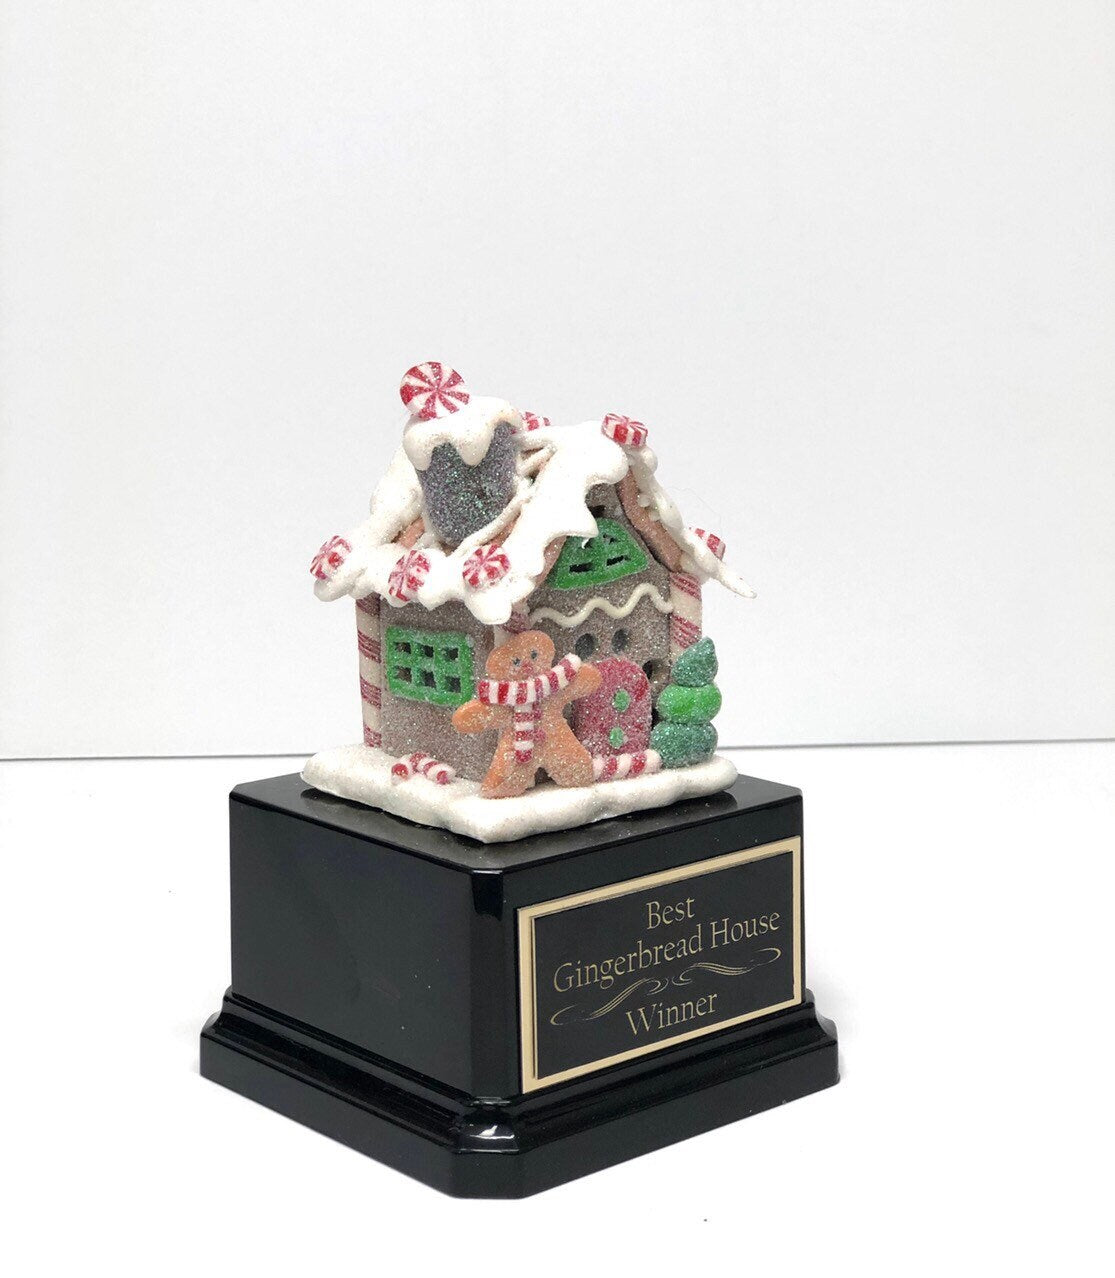 CUSTOM For Bridget Gingerbread House Cookie Bake Off Competition Ugly Sweater Trophy Contest Award Winner Christmas Cookie Christmas Decor